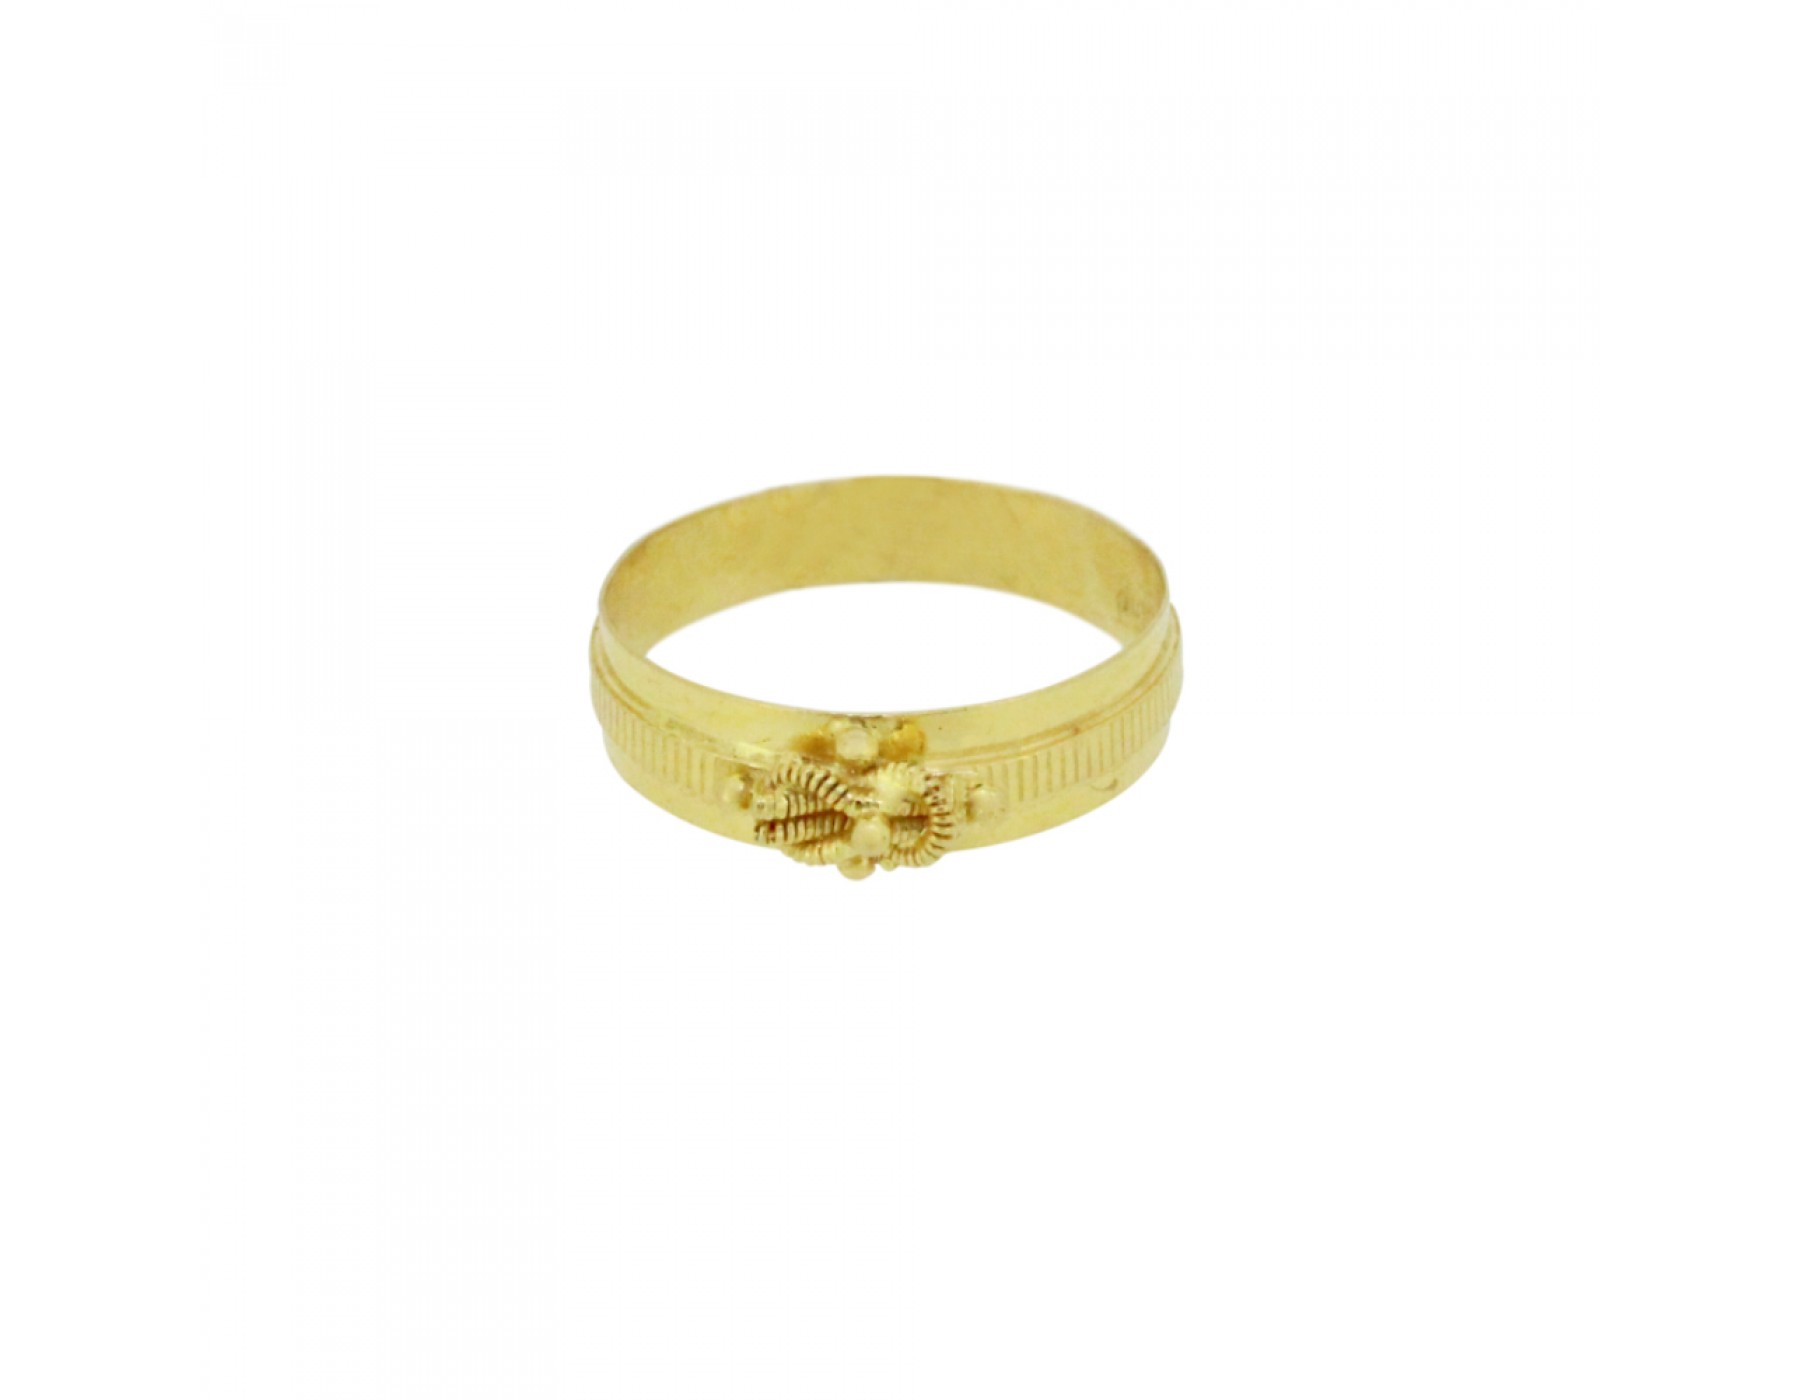 Buy quality 22k gold pink stone gents ring in Ahmedabad